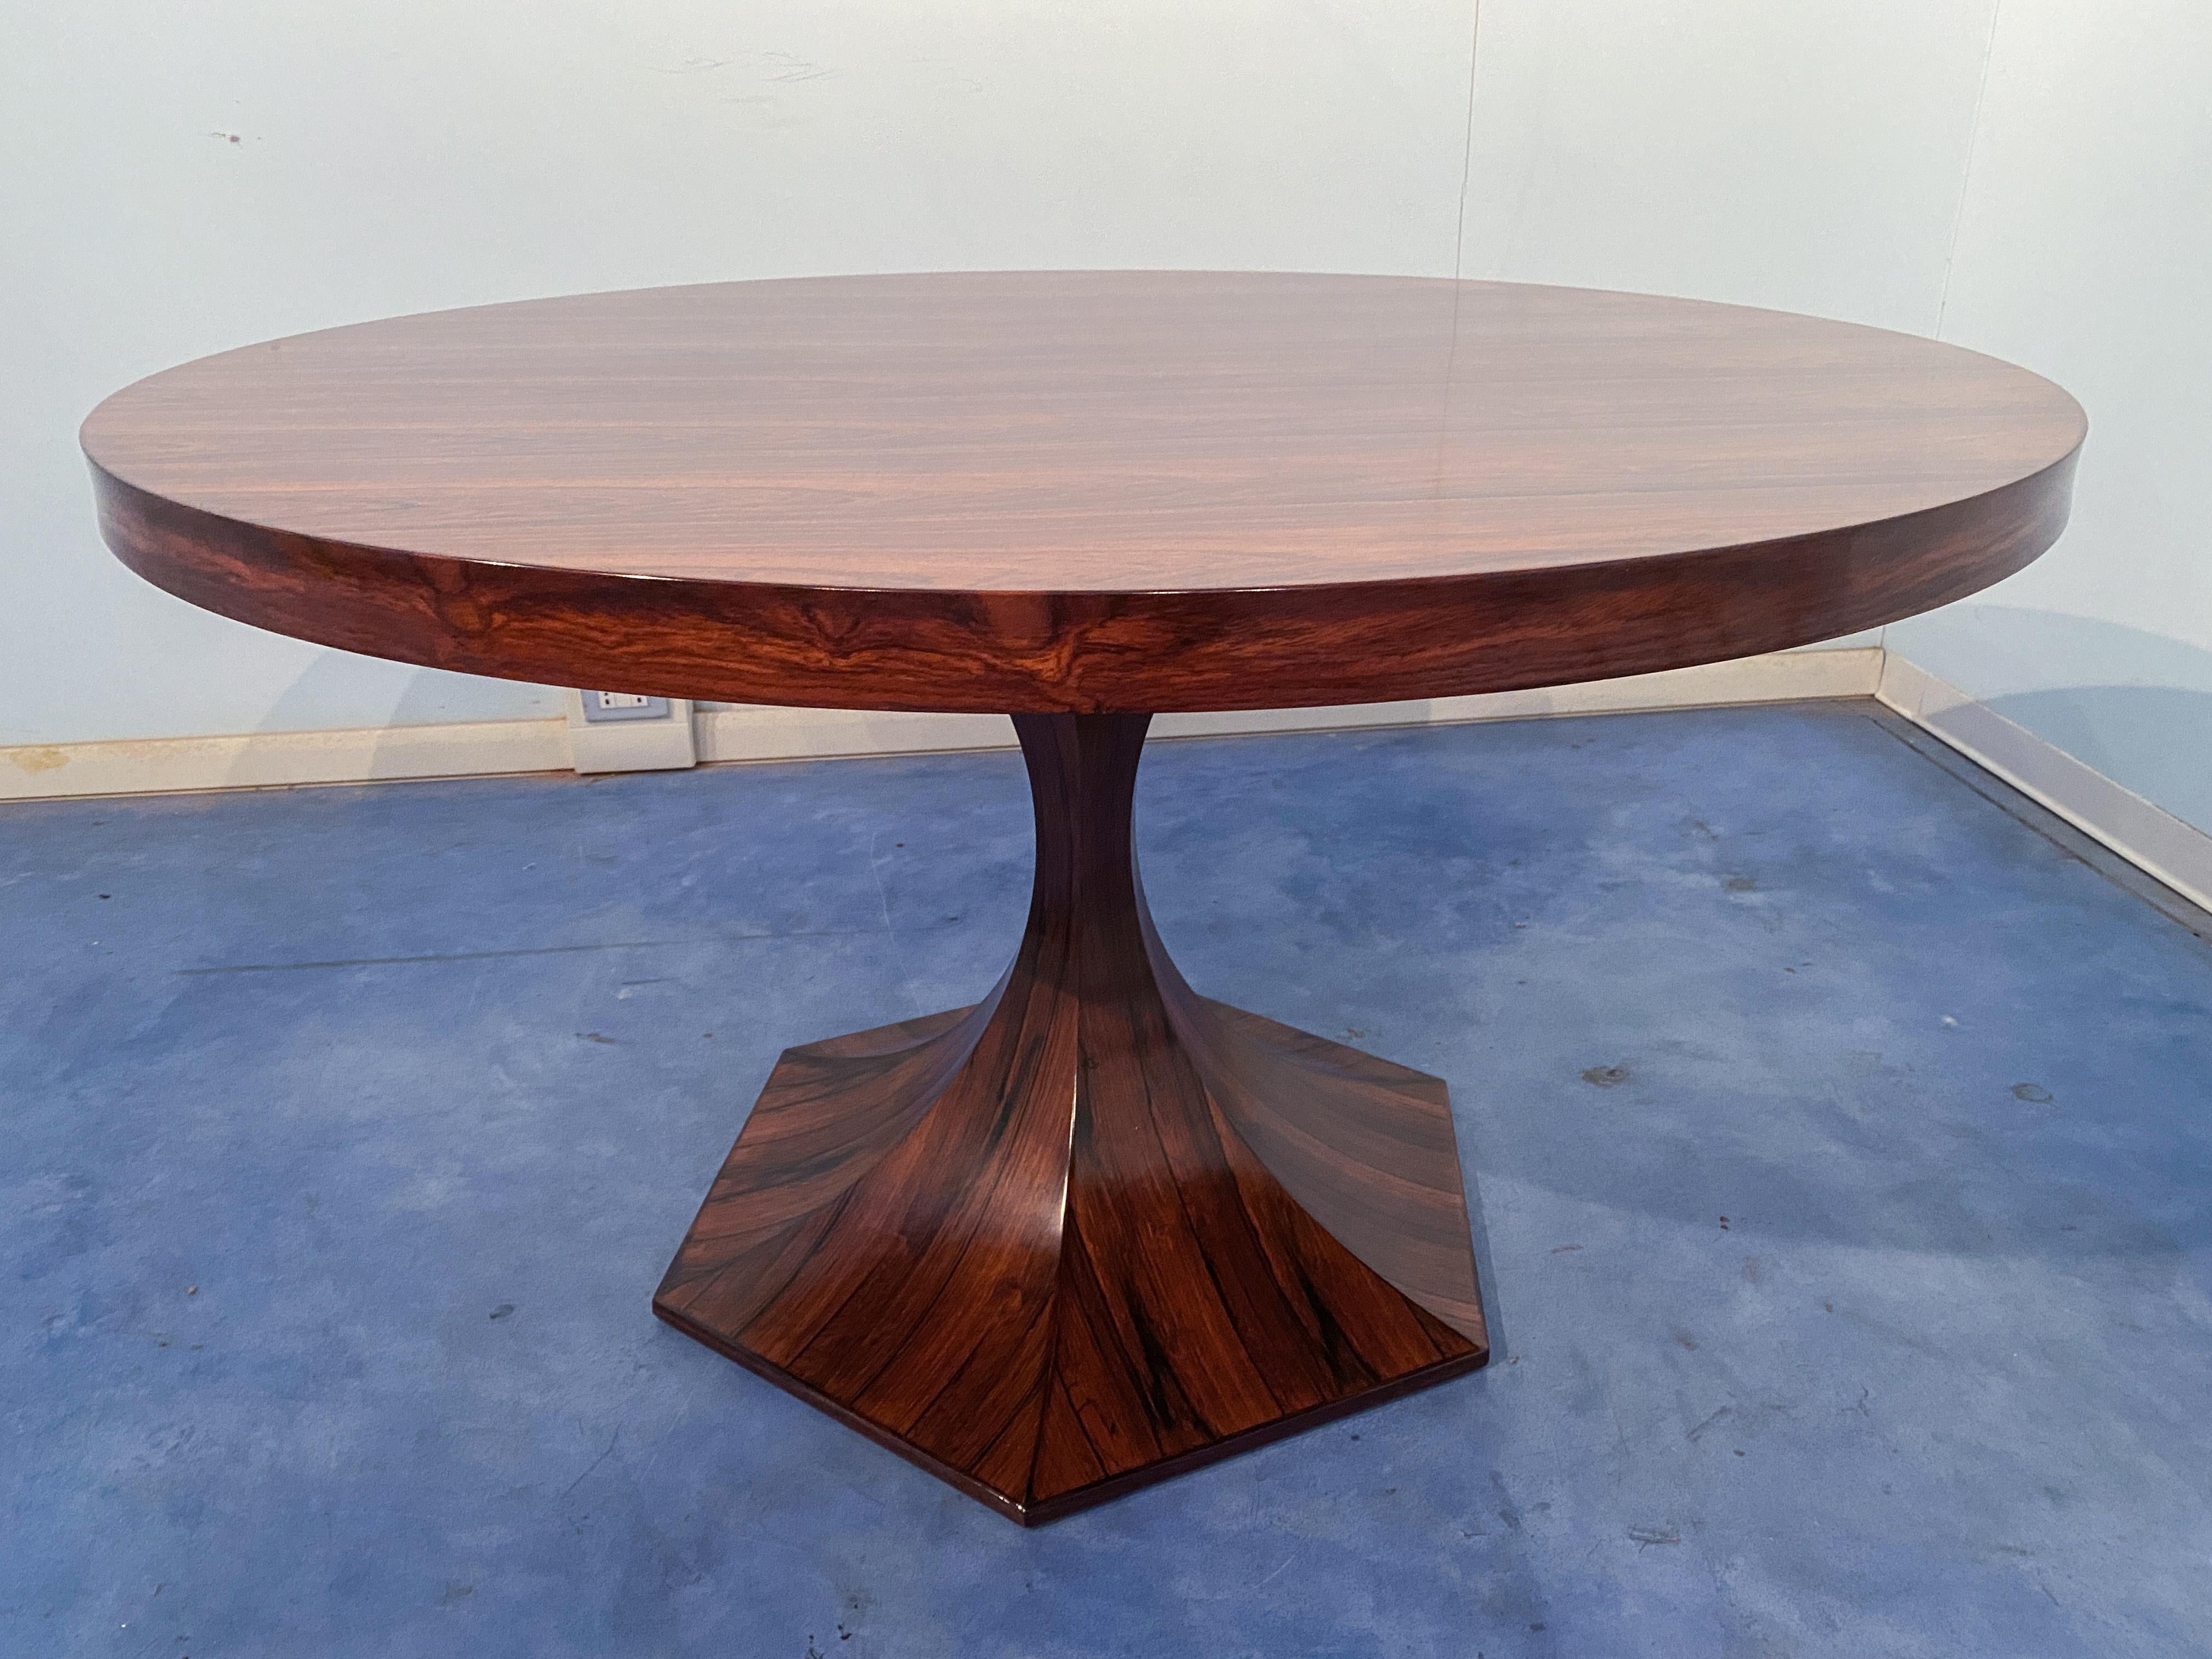 Italian Midcentury Circular Dining Table in Mahogany by Giulio Moscatelli, 1964 For Sale 6